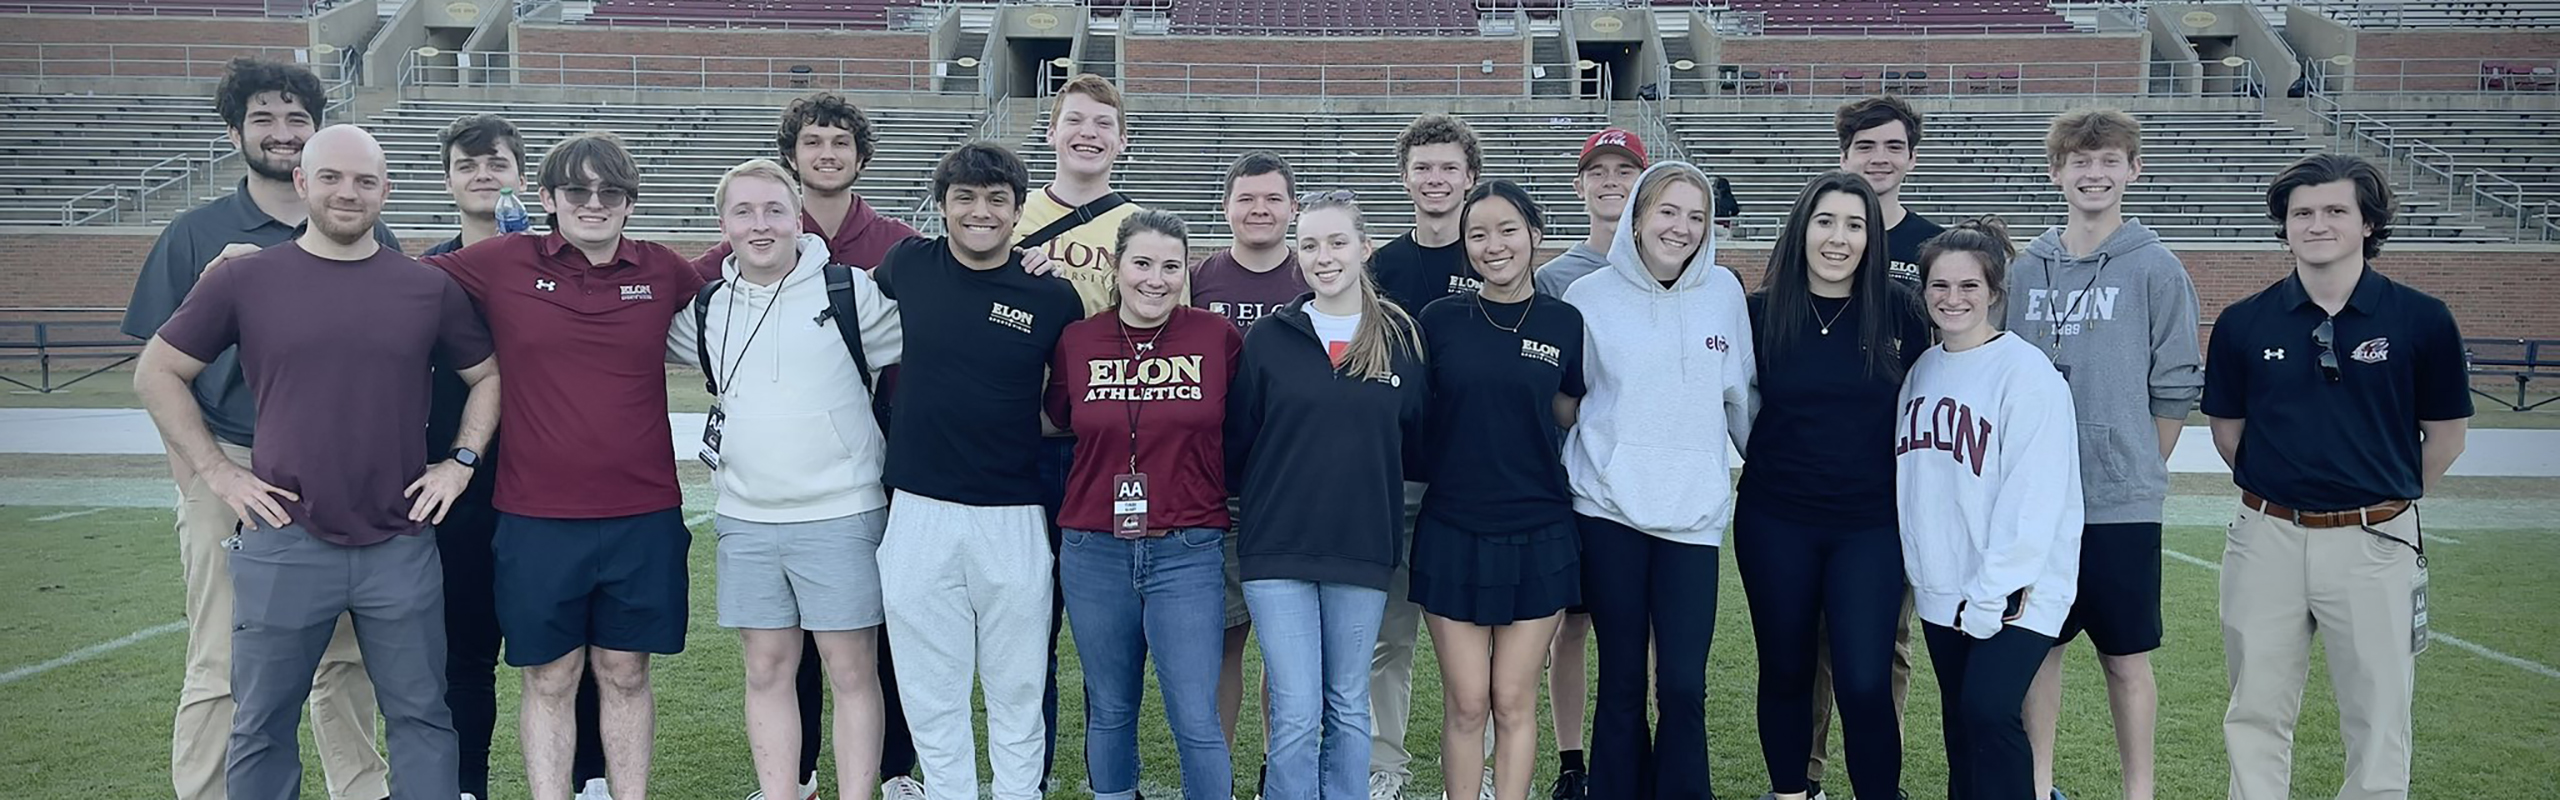 A group of Elon Sports Visions members interested in sports broadcasting and sportscasting, stand together on the Elon football field. Elon is arguably one of the best sports broadcasting schools in the country.